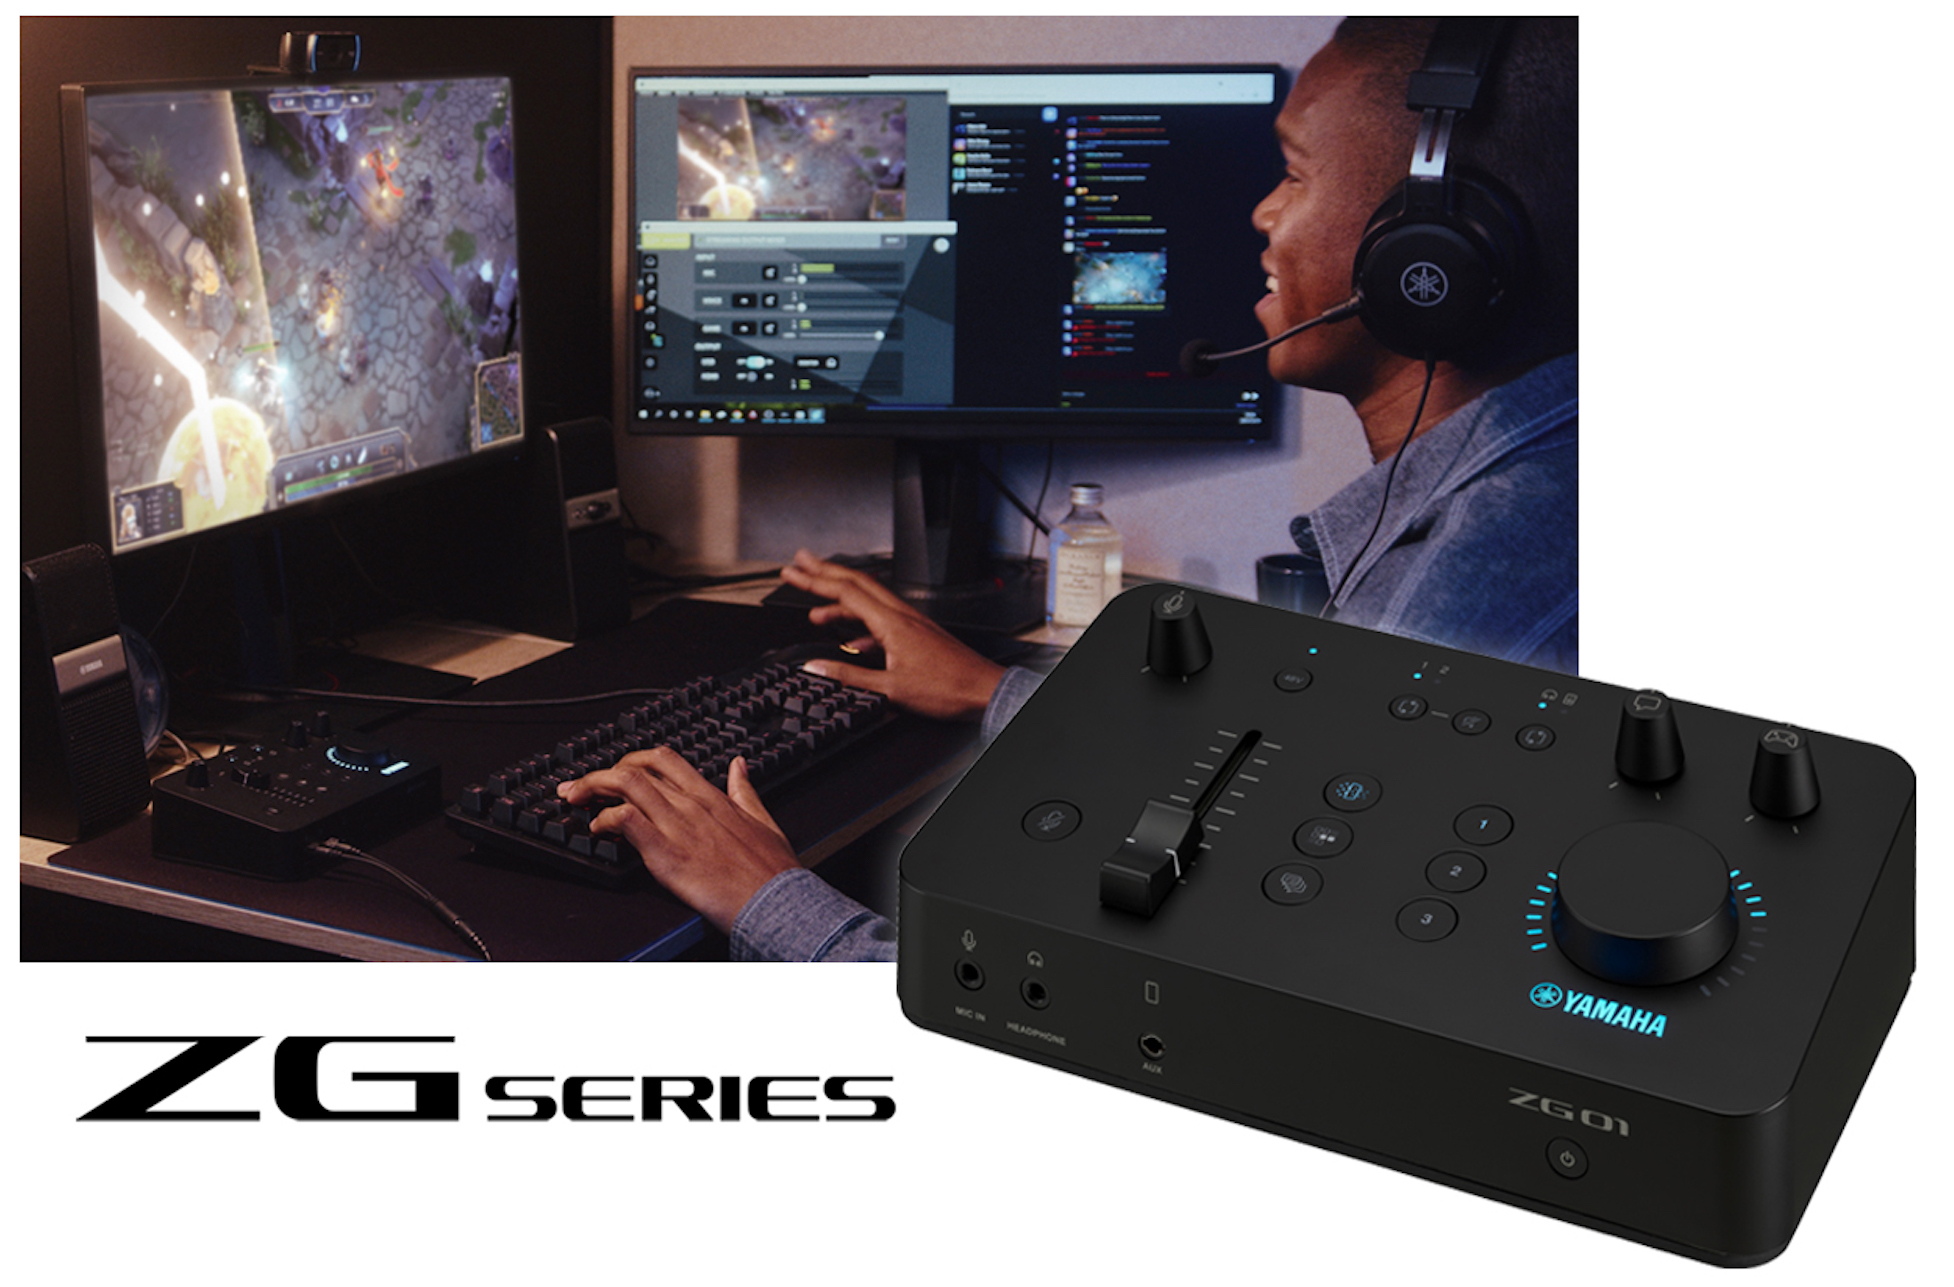 Game streaming audio mixer from Yamaha with DSP FX, more